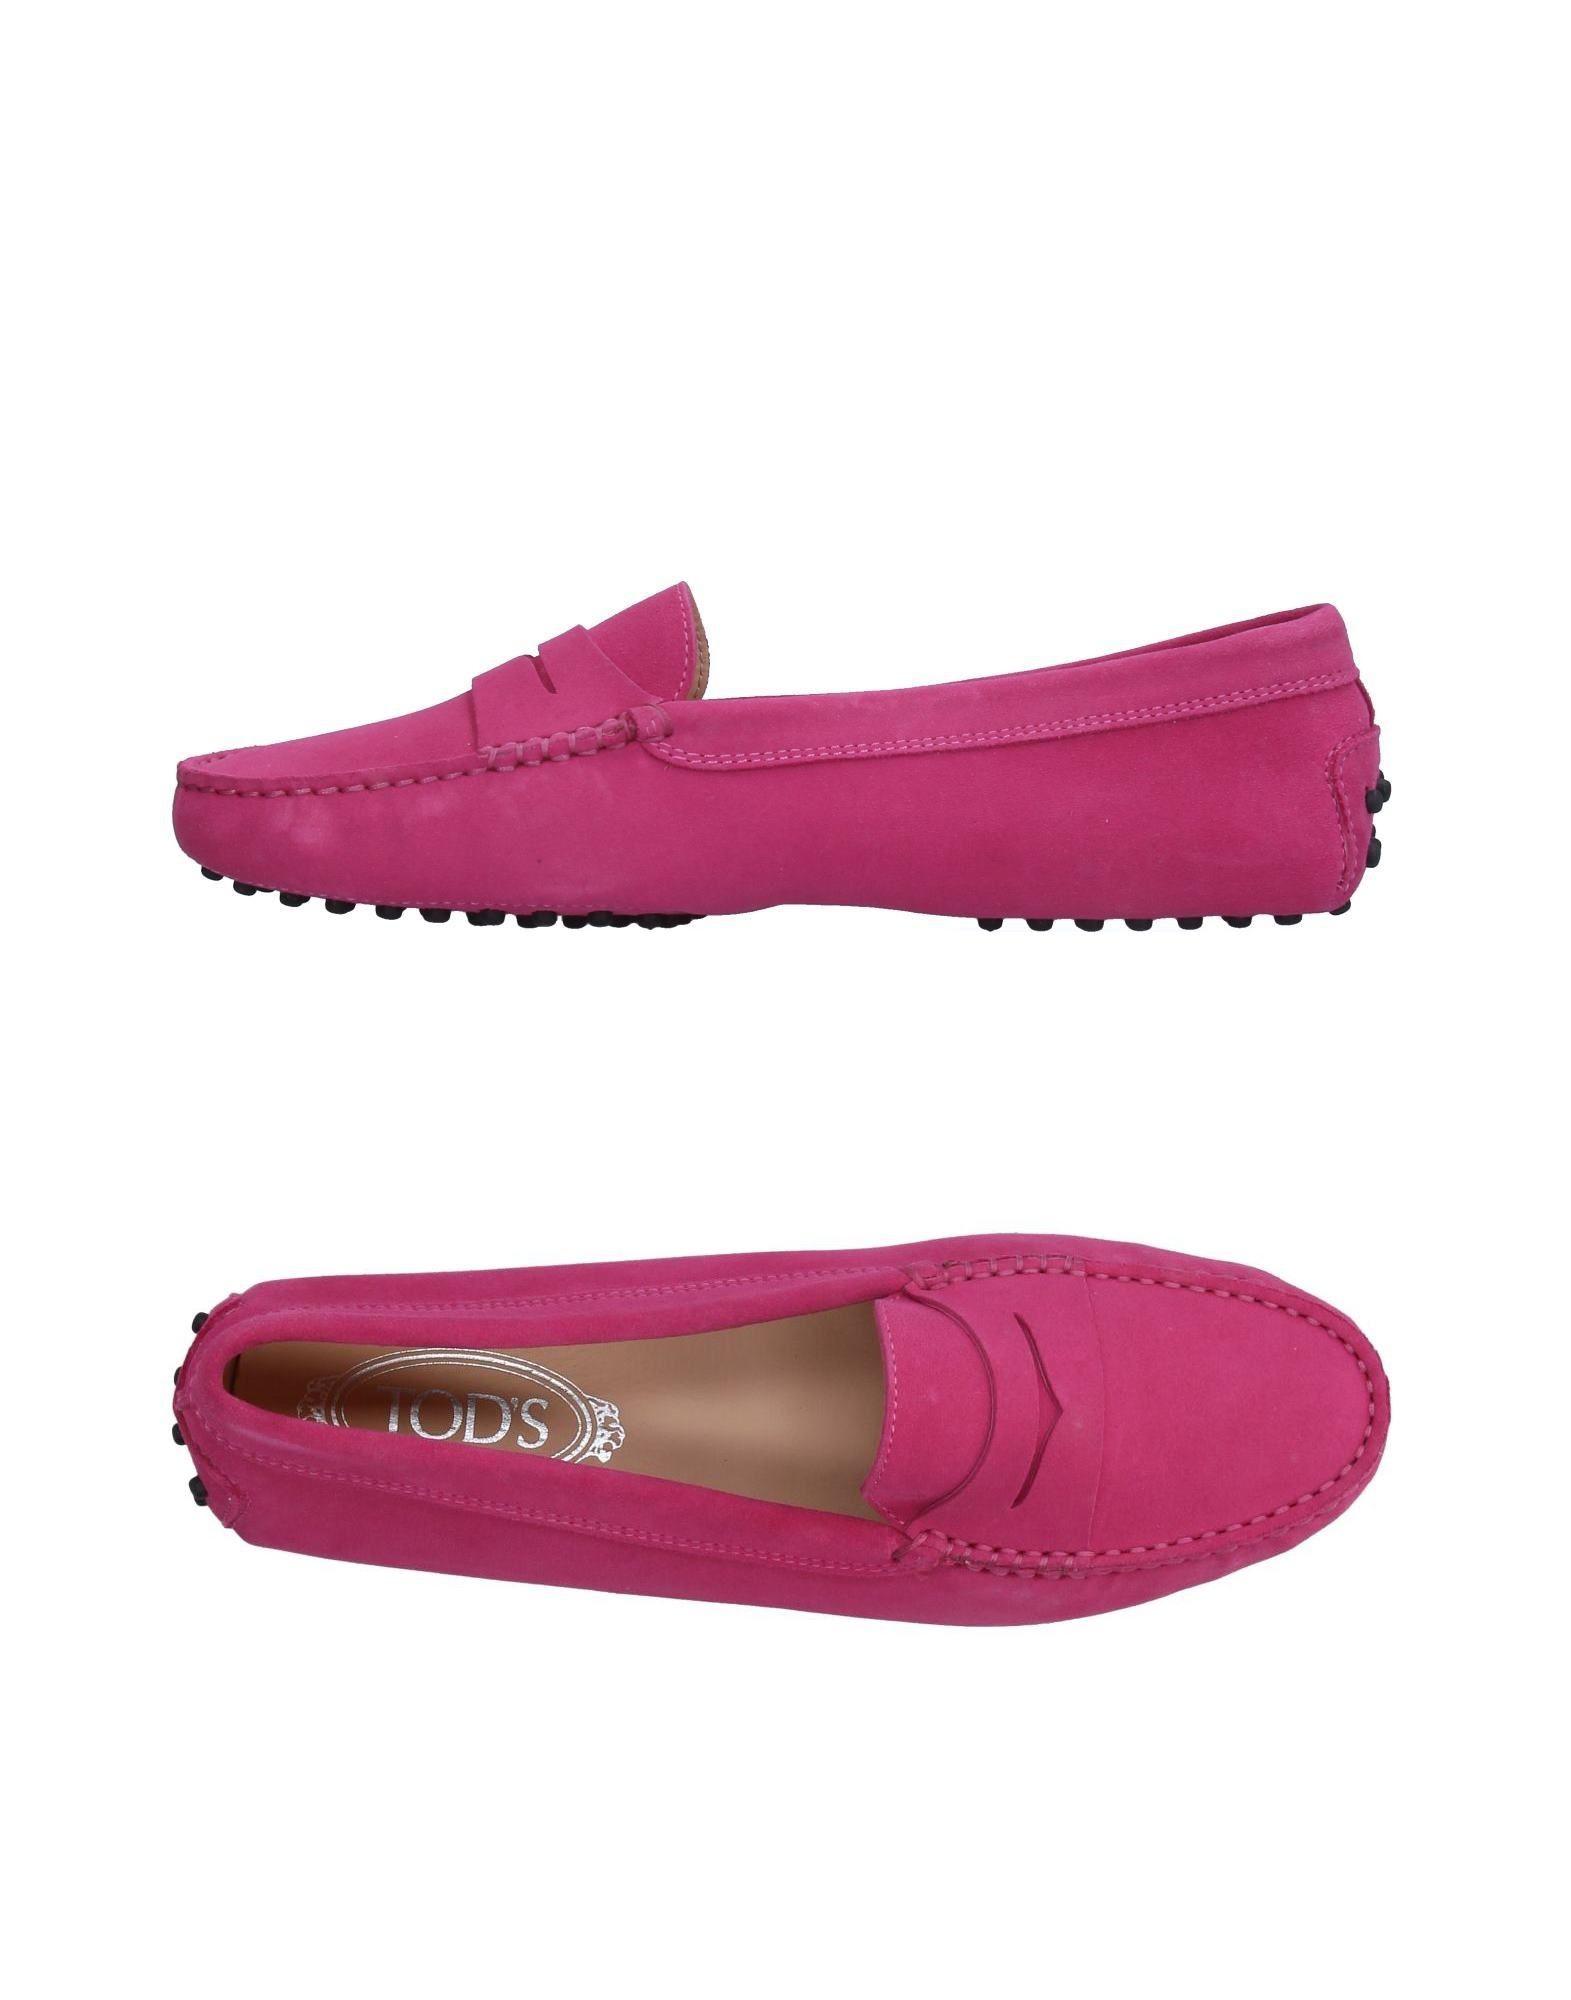 Lyst - Tod's Loafer in Purple